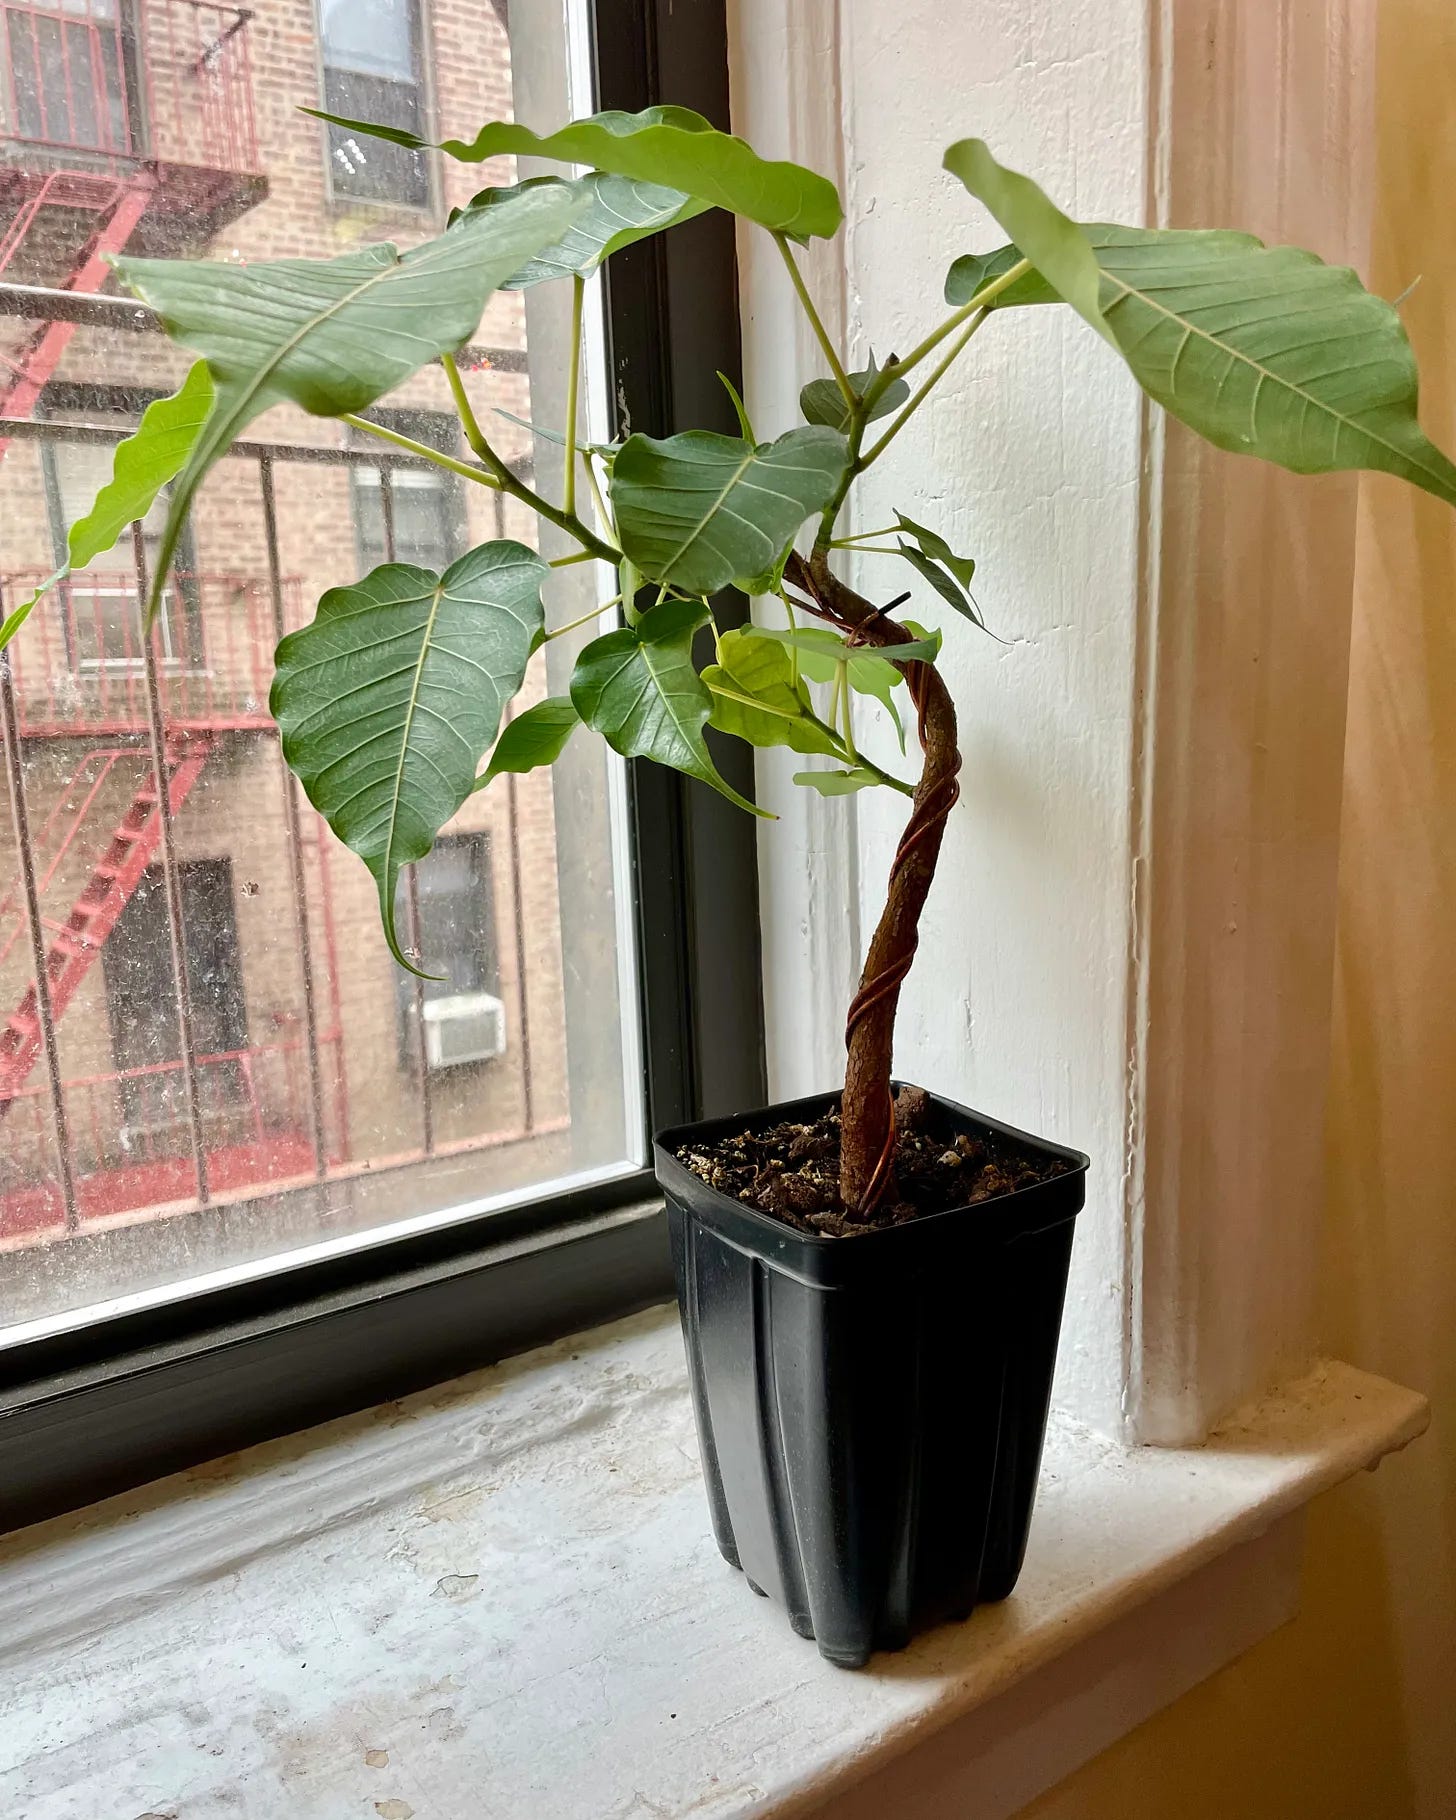 ID: Ficus on my windowsill, much younger and skinnier